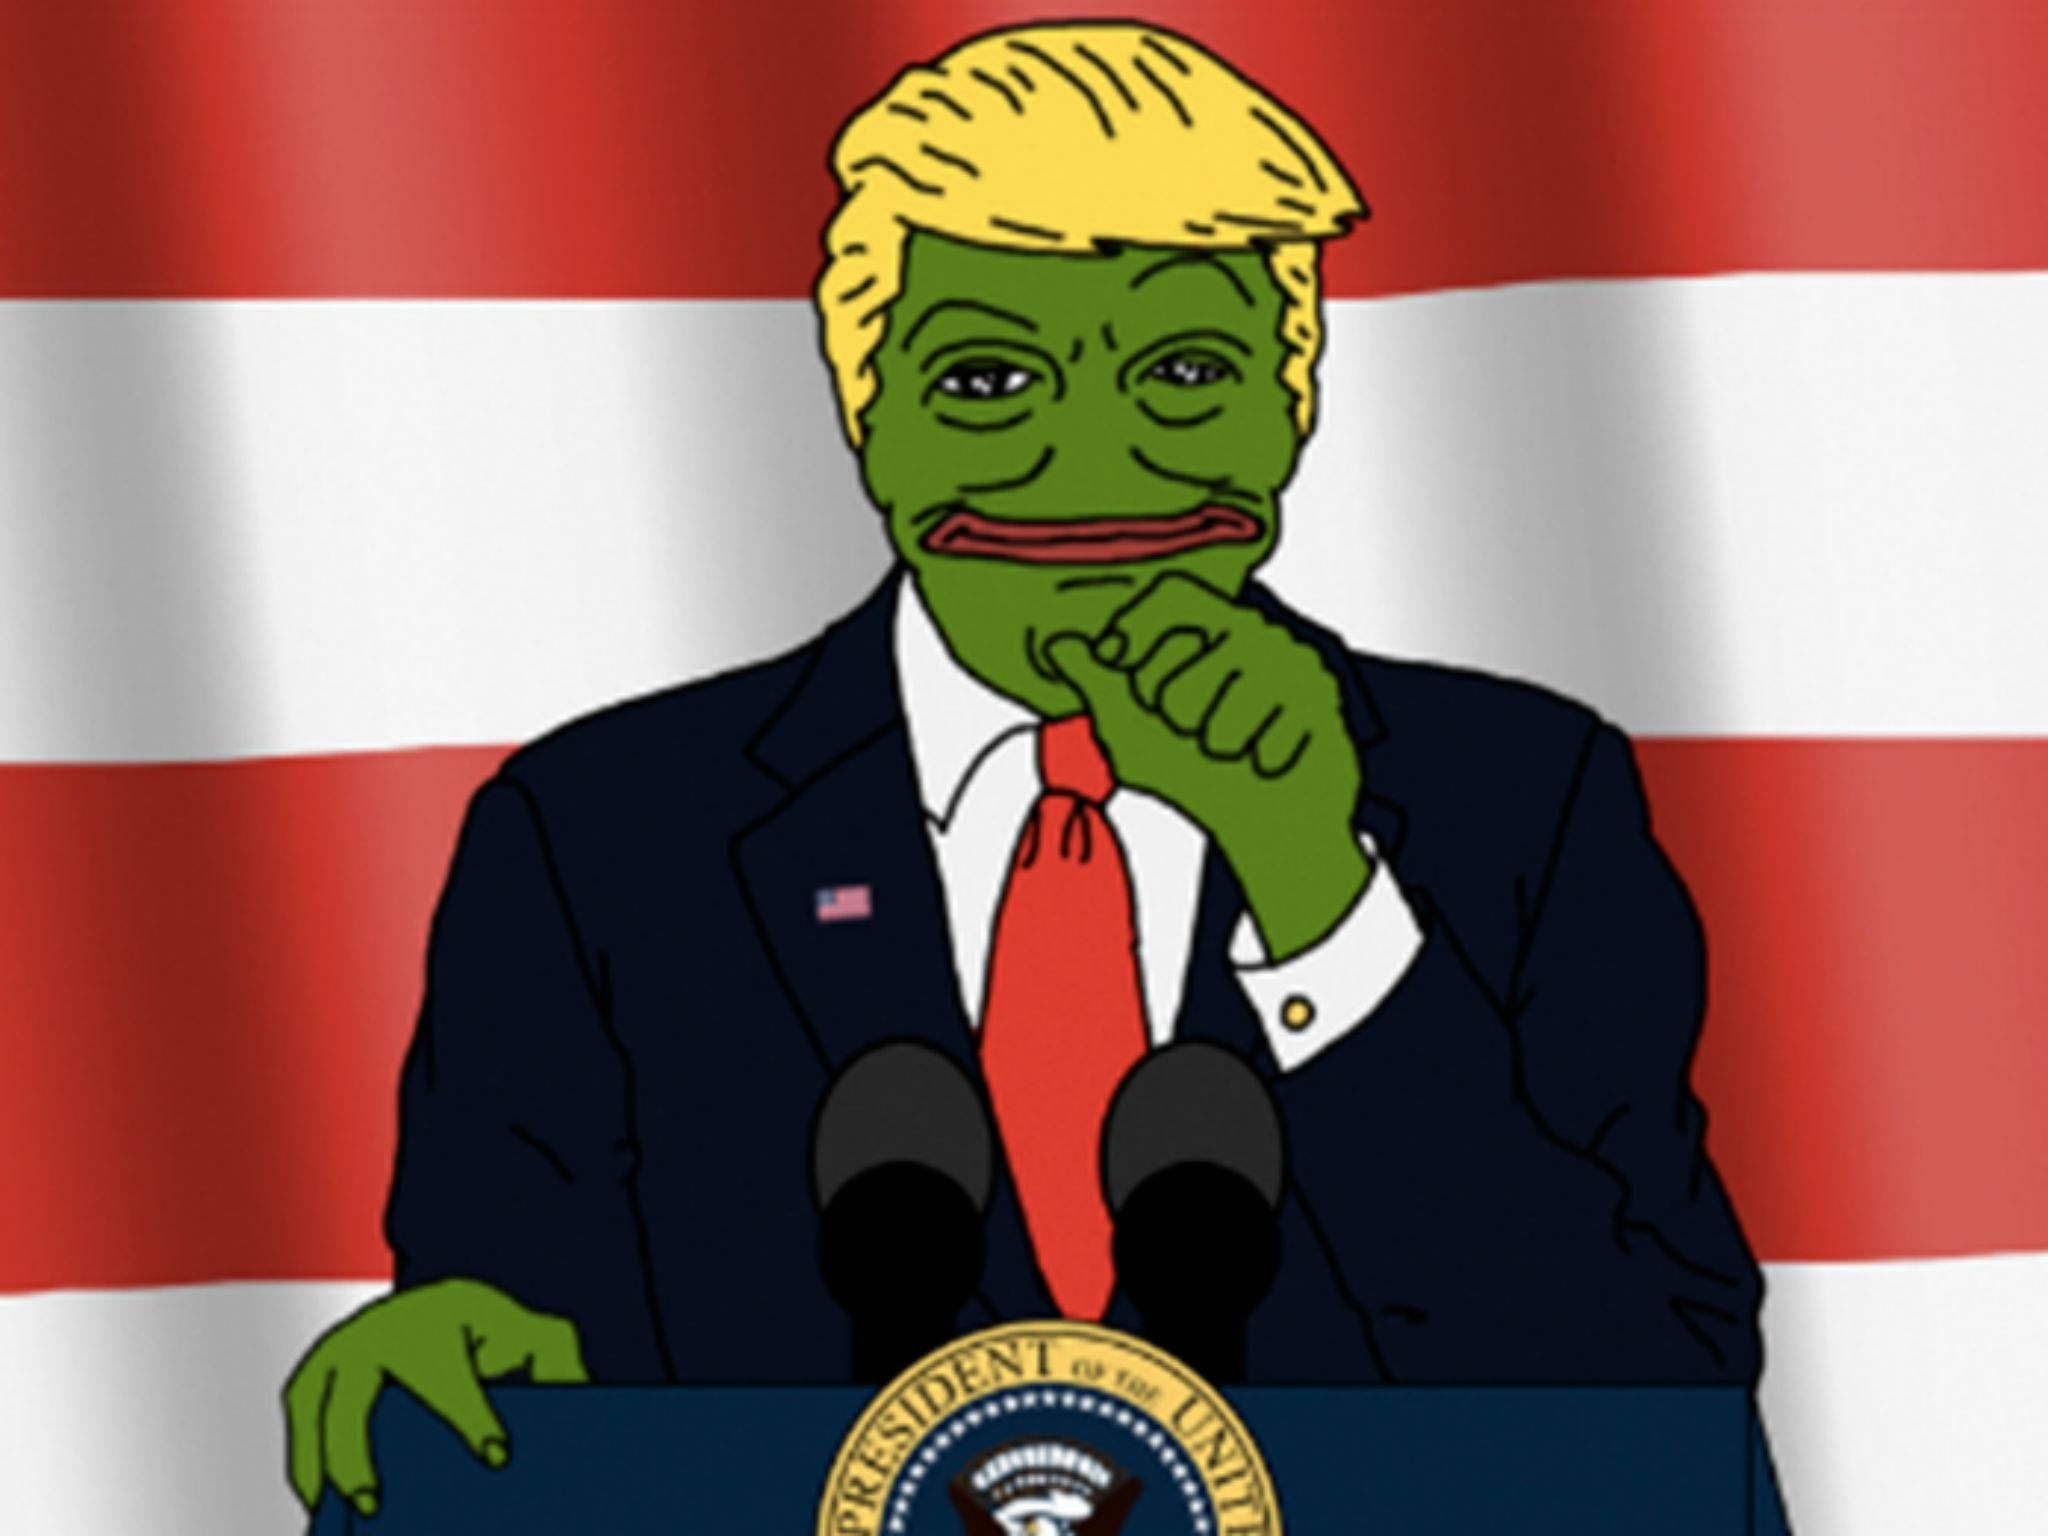 Pepe the Frog creator launches campaign to free meme from Donald Trump supporters